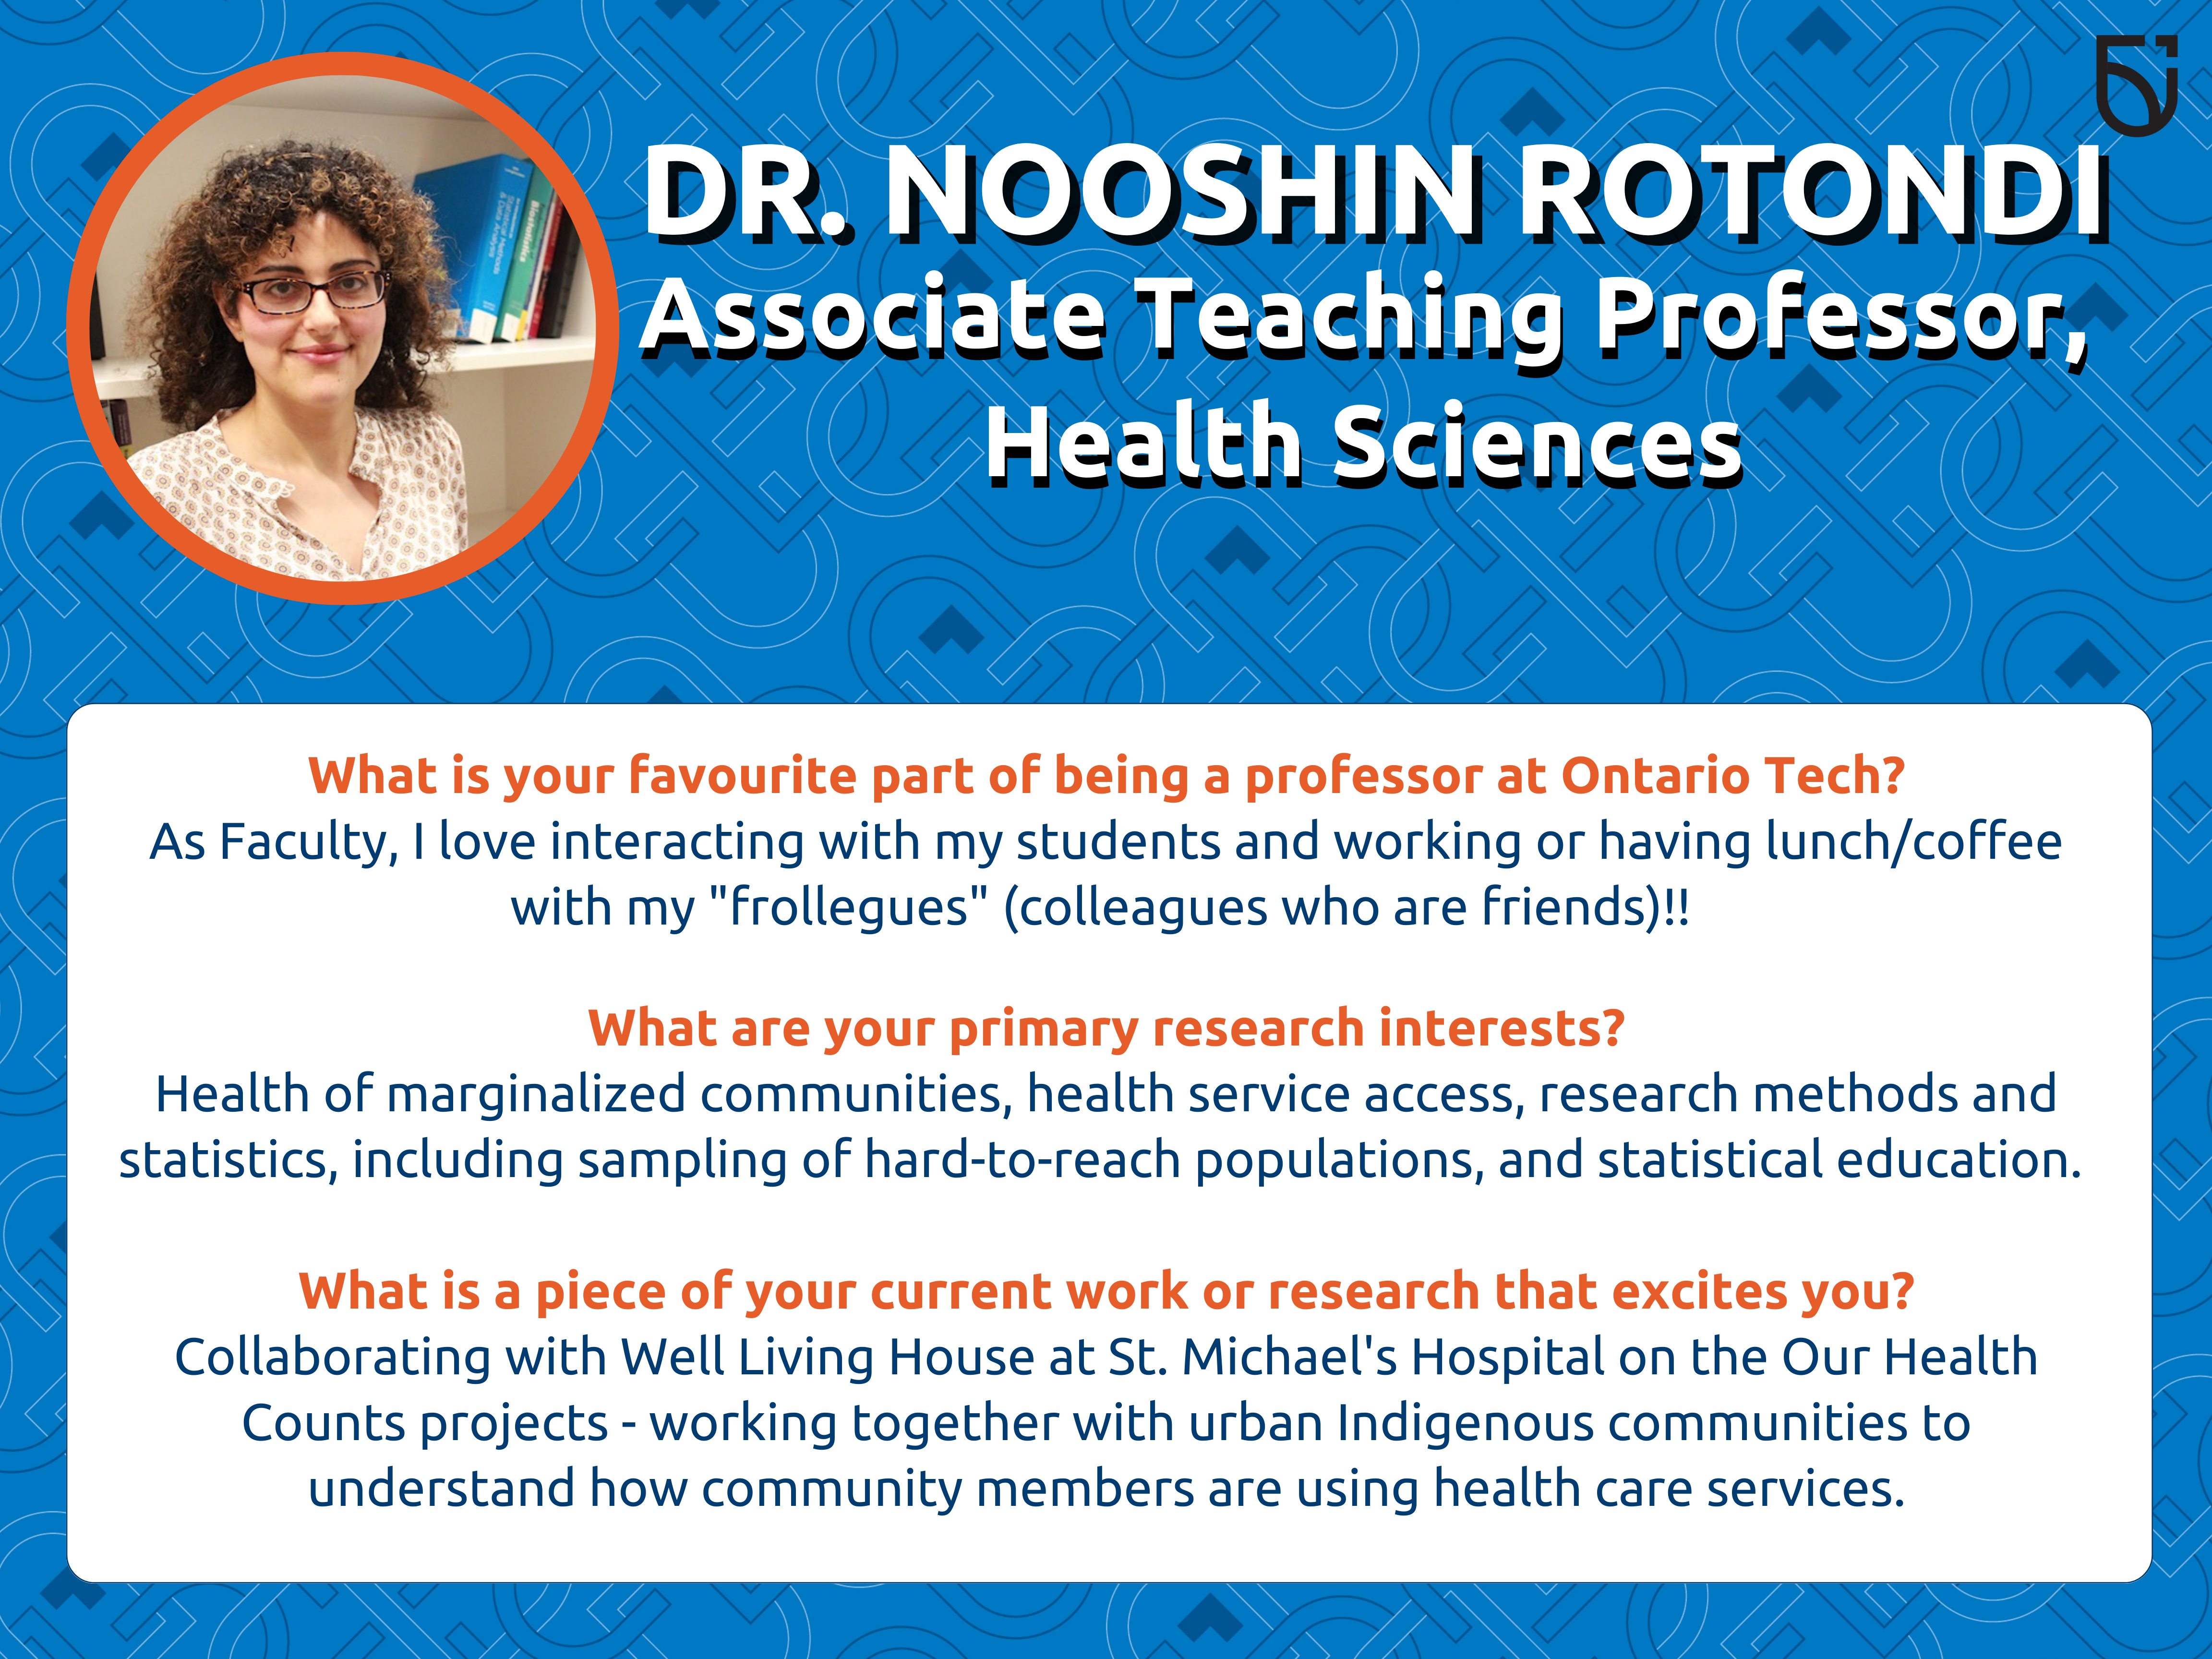 This photo is a Women’s Wednesday feature of Dr. Nooshin Rotondi, an Associate Teaching Professor in the Faculty of Health Sciences